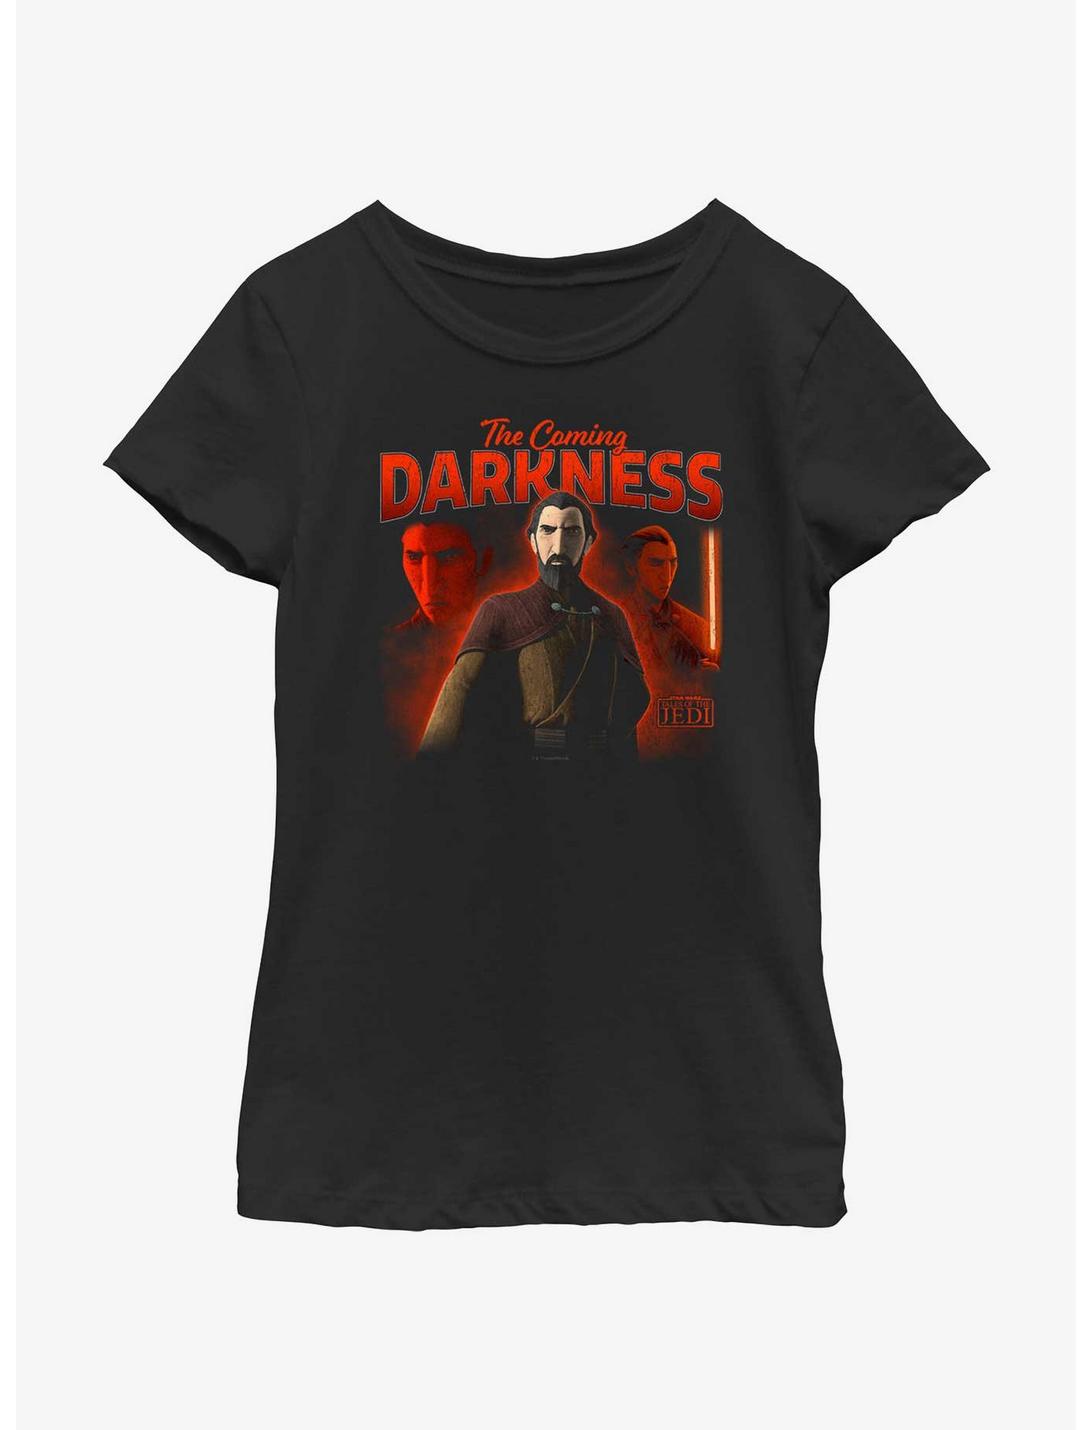 Star Wars: Tales of the Jedi The Coming Darkness Count Dooku Youth Girls T-Shirt, BLACK, hi-res